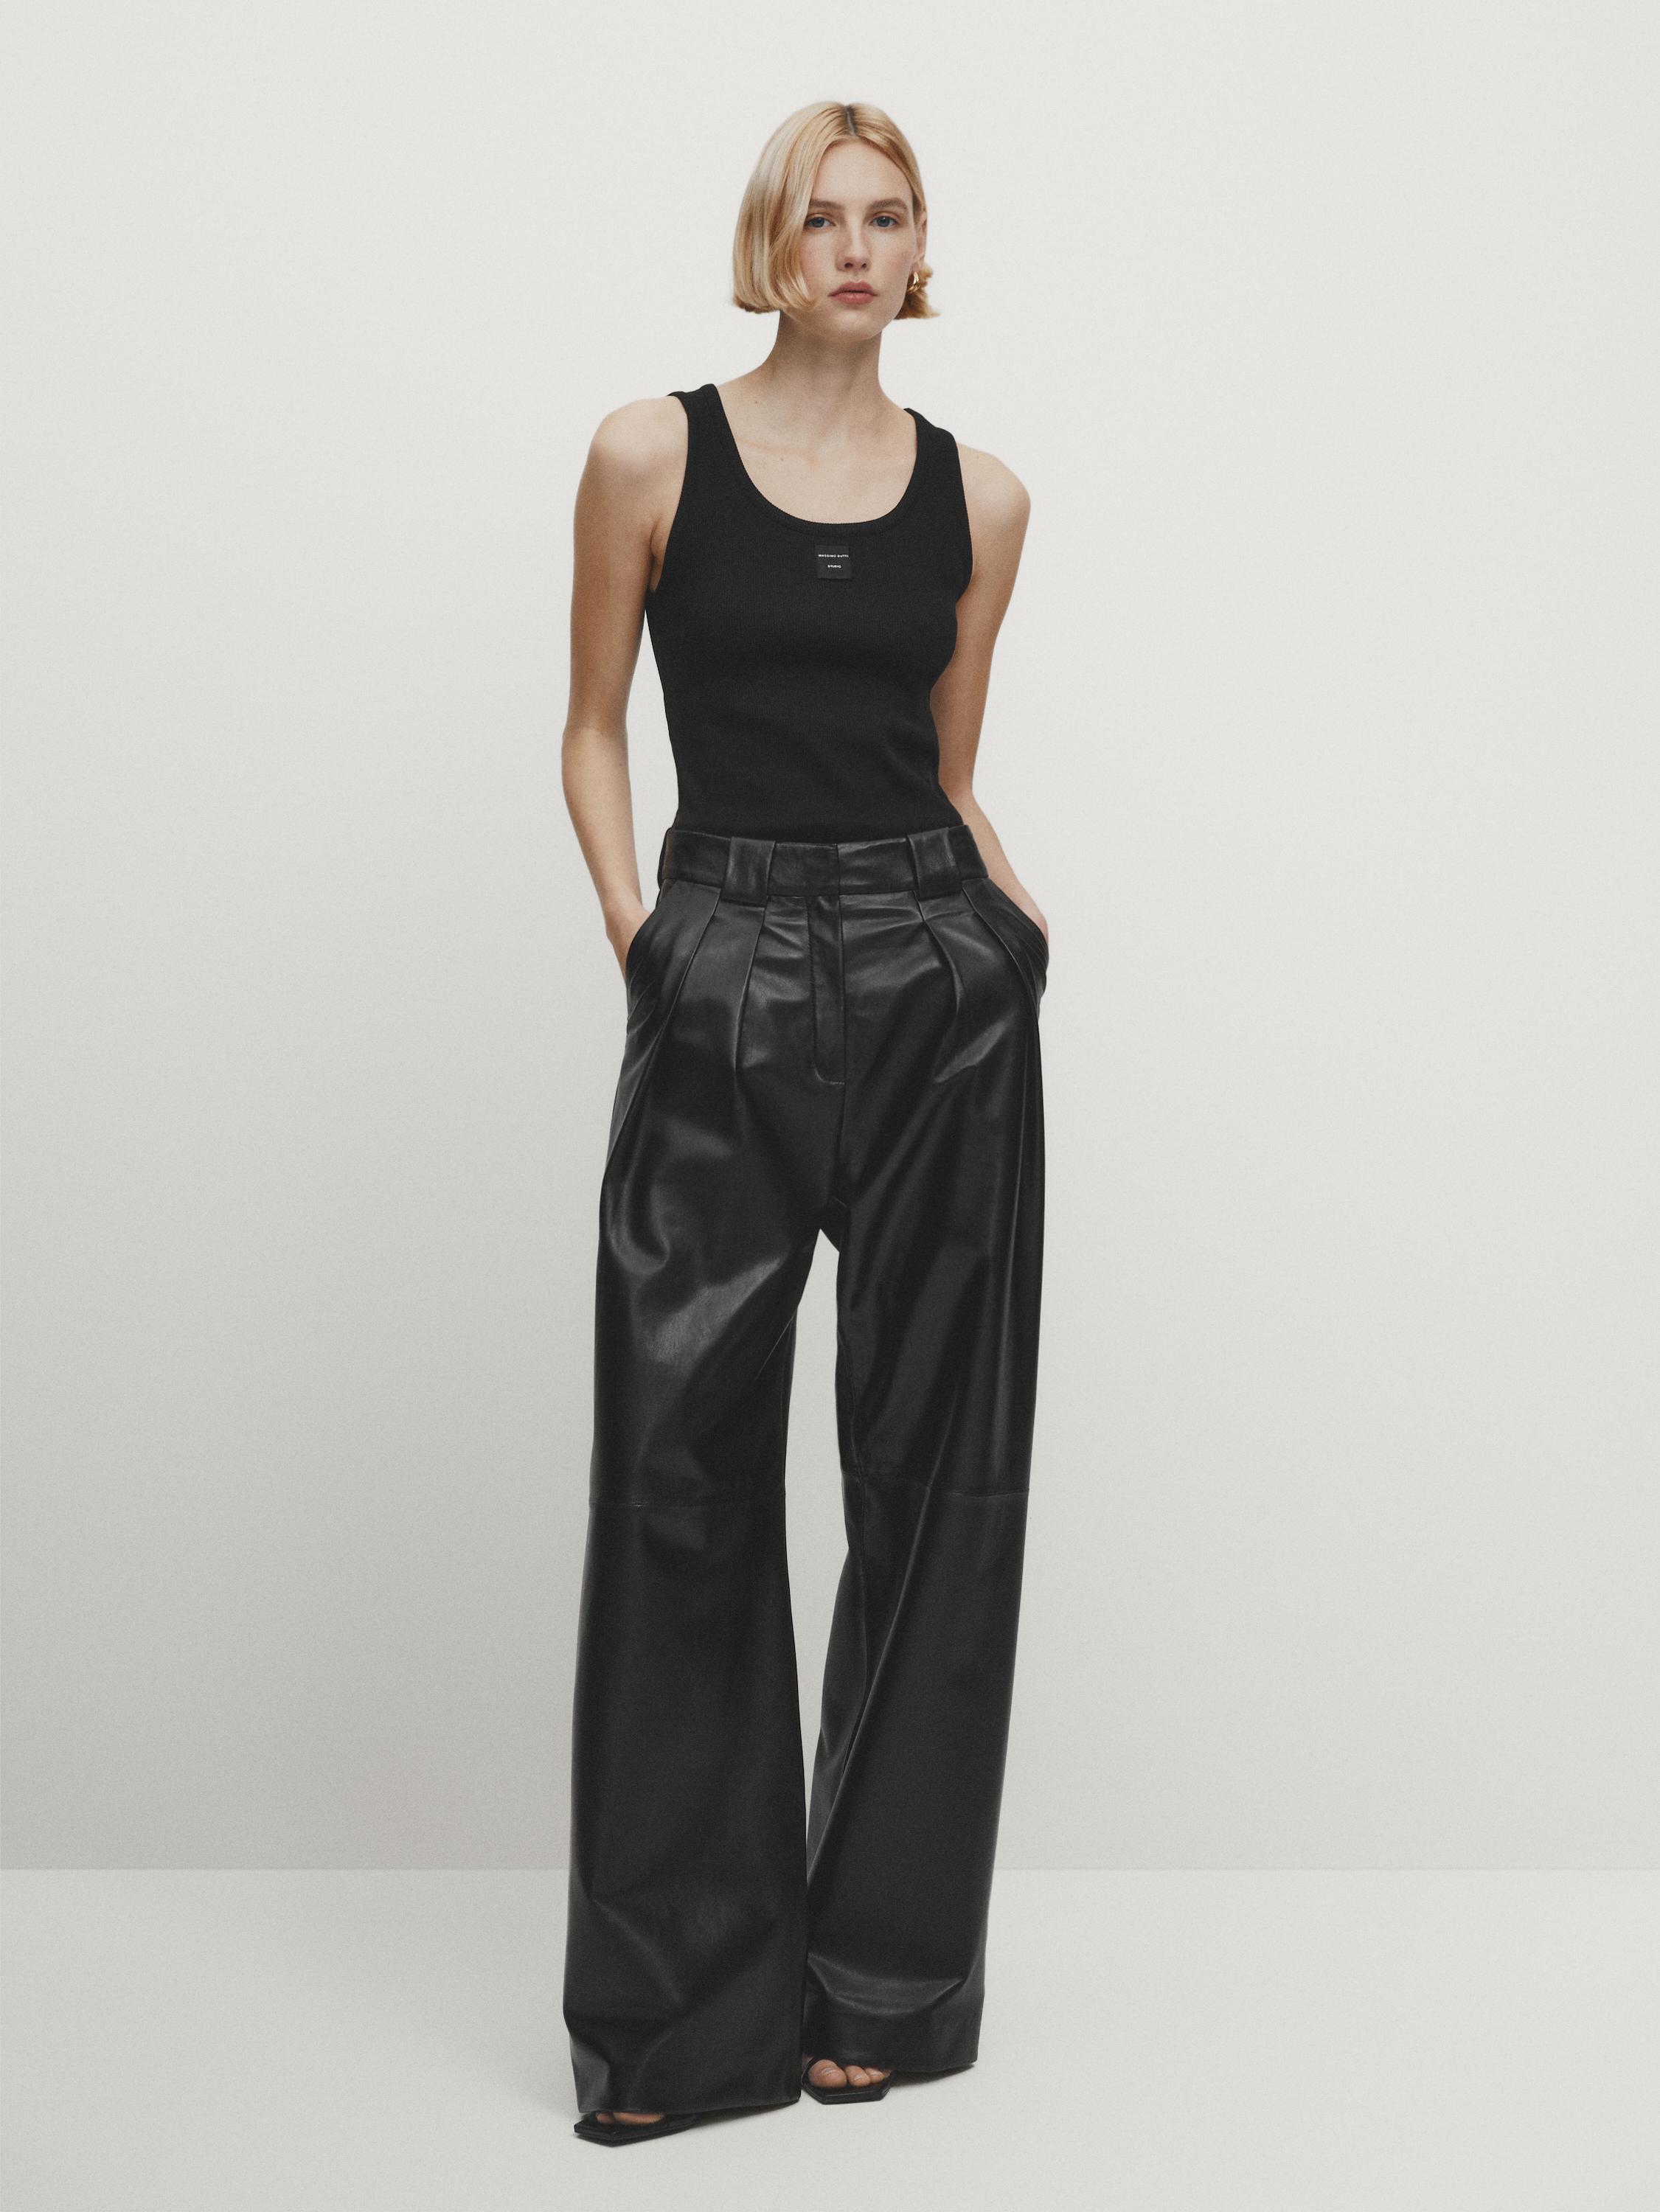 Zara Women Leather trousers 5479/003/800 (X-Large): Buy Online at Best  Price in UAE 